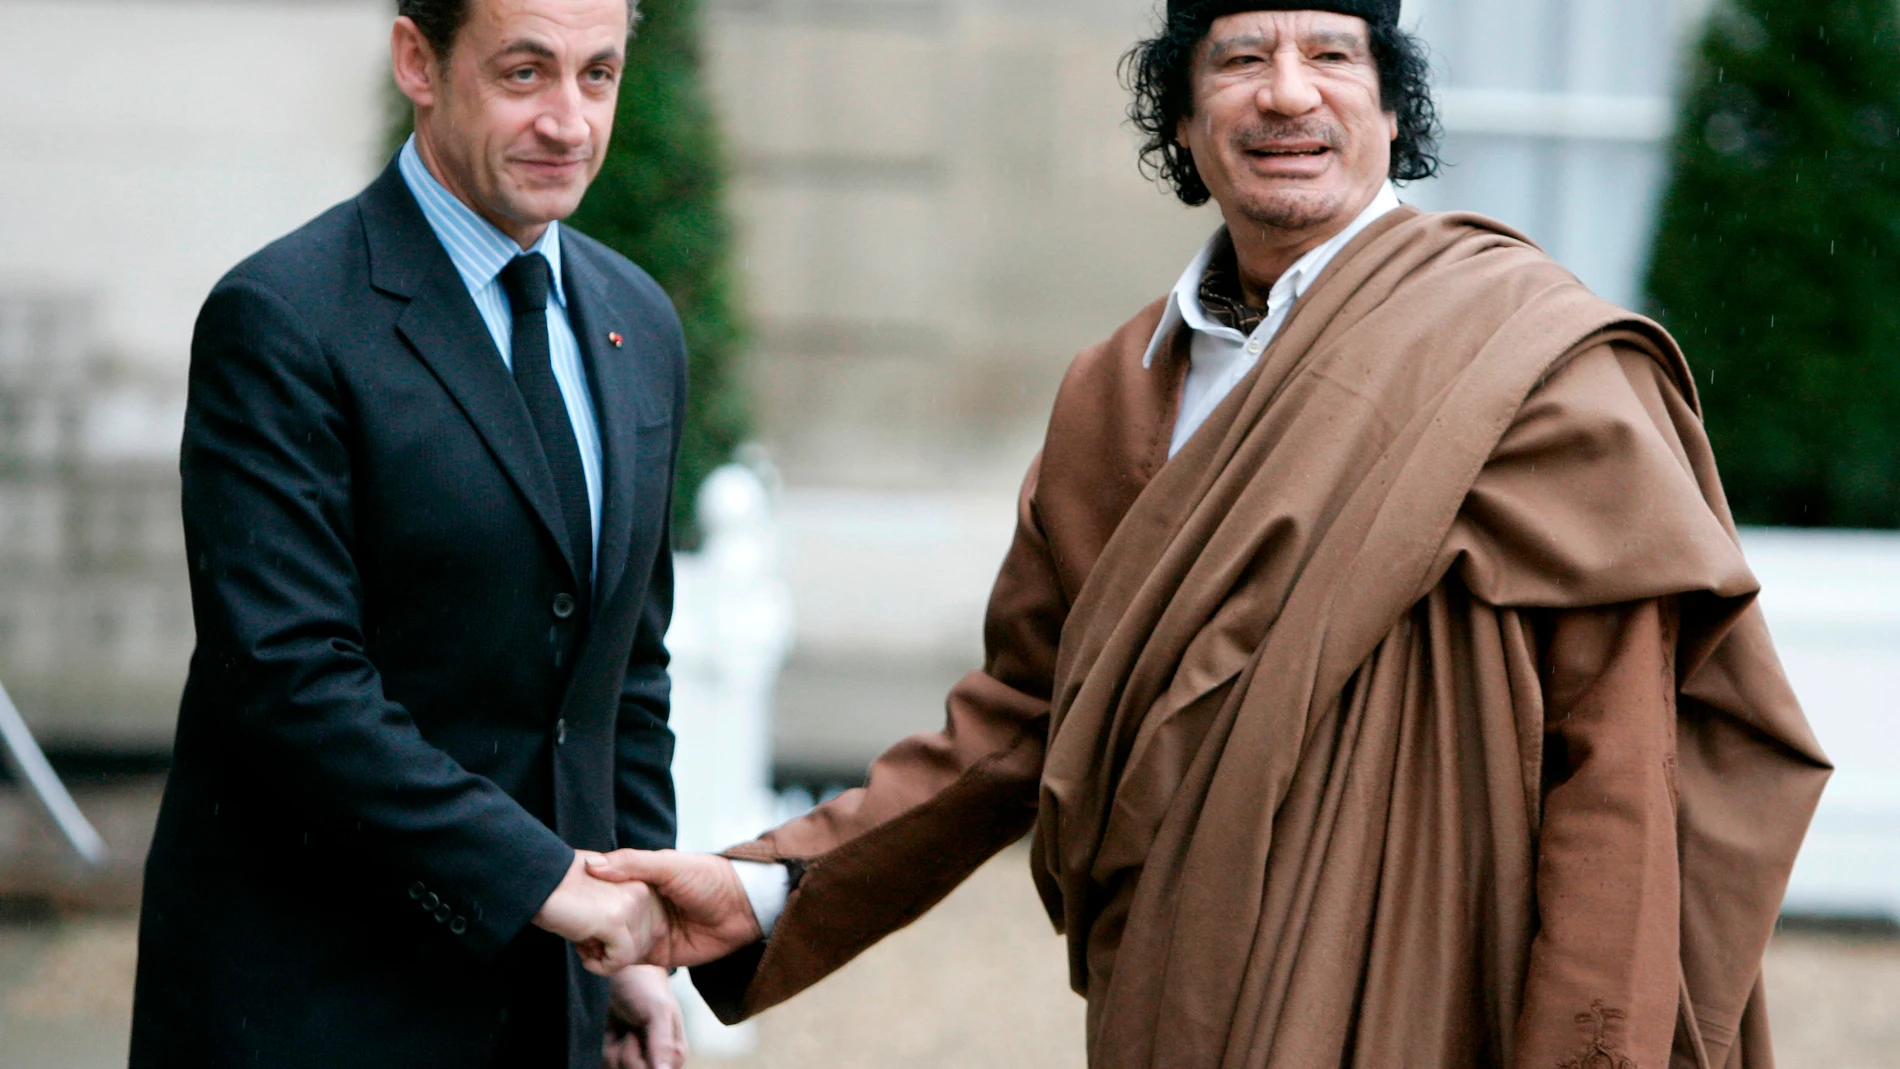 FILE - French President Nicolas Sarkozy, left, greets Libyan leader Col. Moammar Gadhafi upon his arrival at the Elysee Palace, Dec. 10 2007 in Paris. French investigative judges have filed Friday Oct.6, 2023 preliminary charges against former President Nicolas Sarkozy for his alleged involvement in an attempt to mislead magistrates in order to clear him in a case regarding the suspected illegal financing from Libya of his 2007 presidential campaign. (AP Photo/Francois Mori, File)